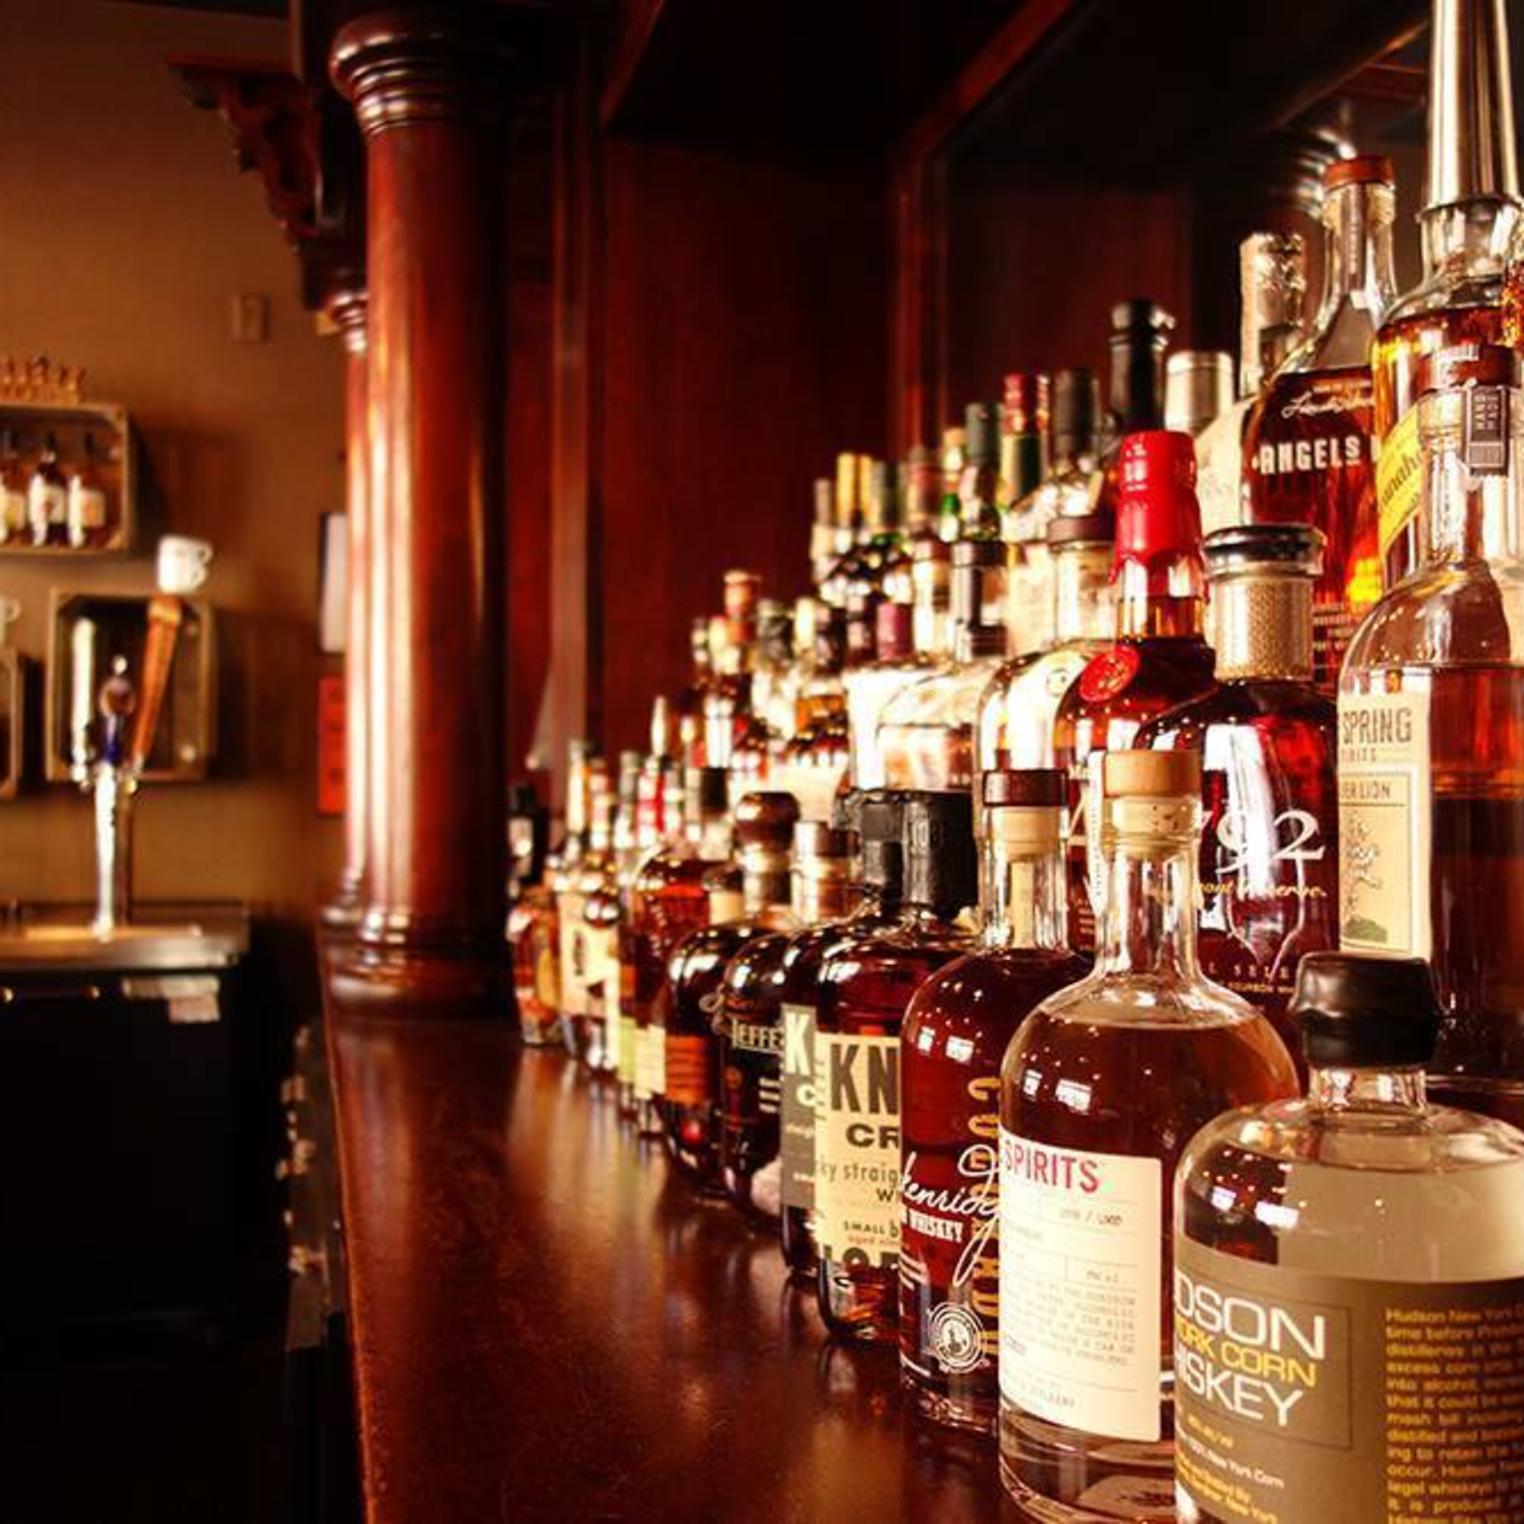 Checkout our extensive whiskey list at the bar.